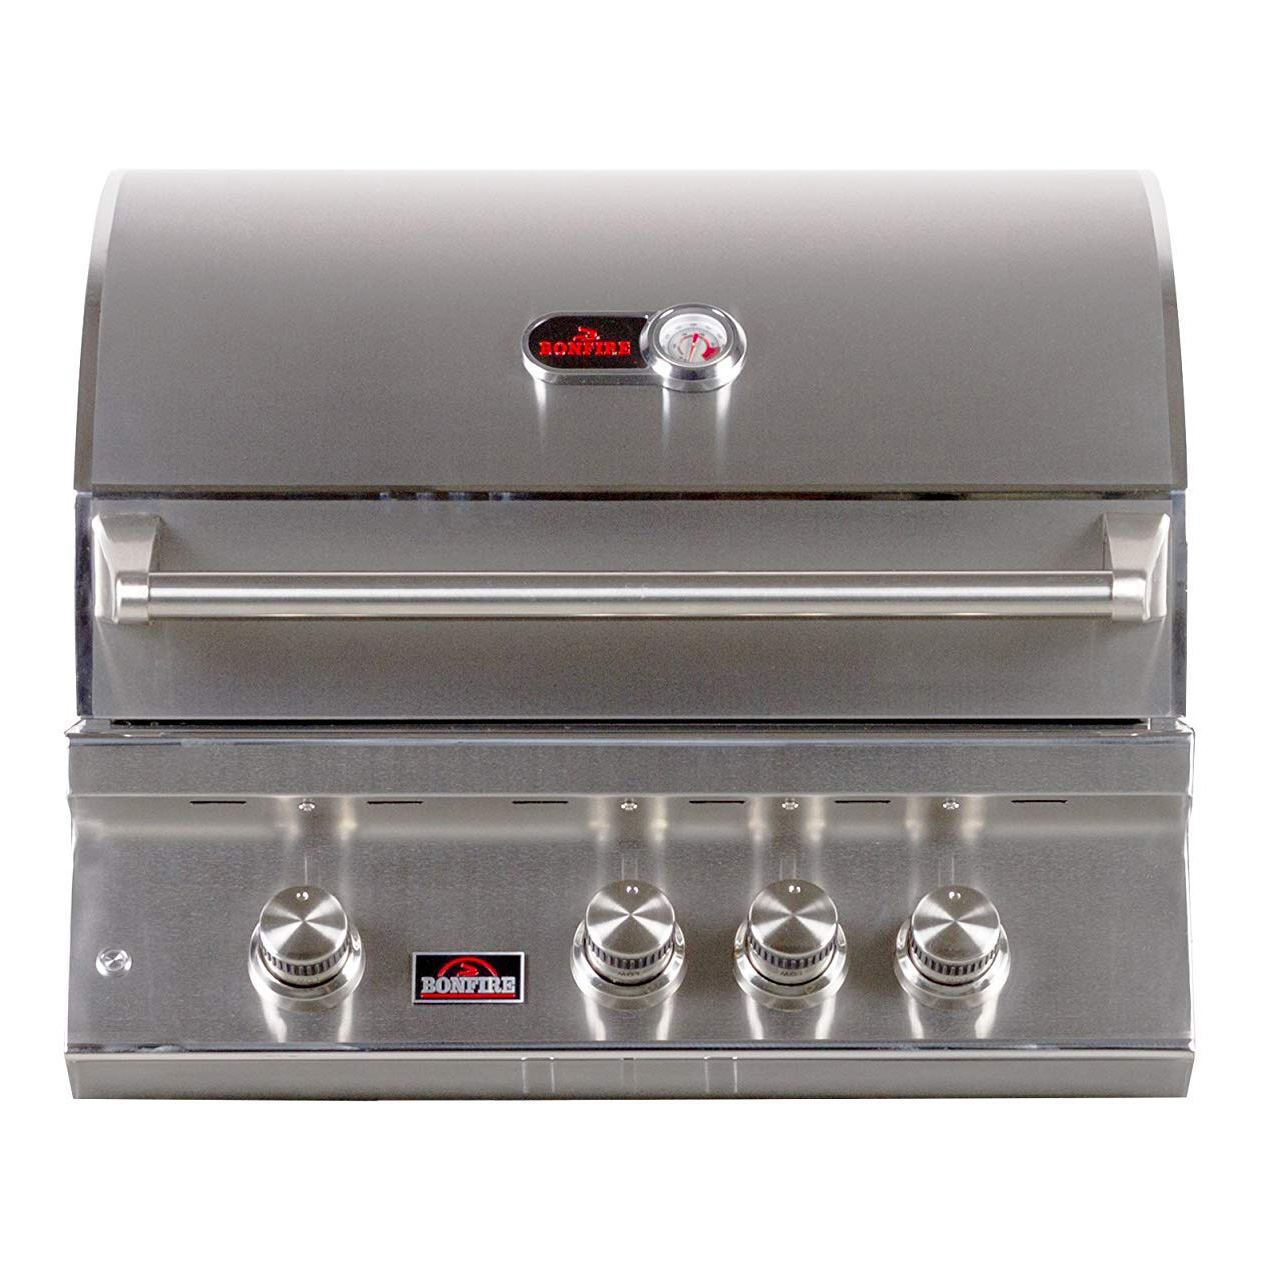 Bonfire CBB3LP 28" Built In 3 Burner Propane Gas Grill with Infrared Rotisserie - image 1 of 7